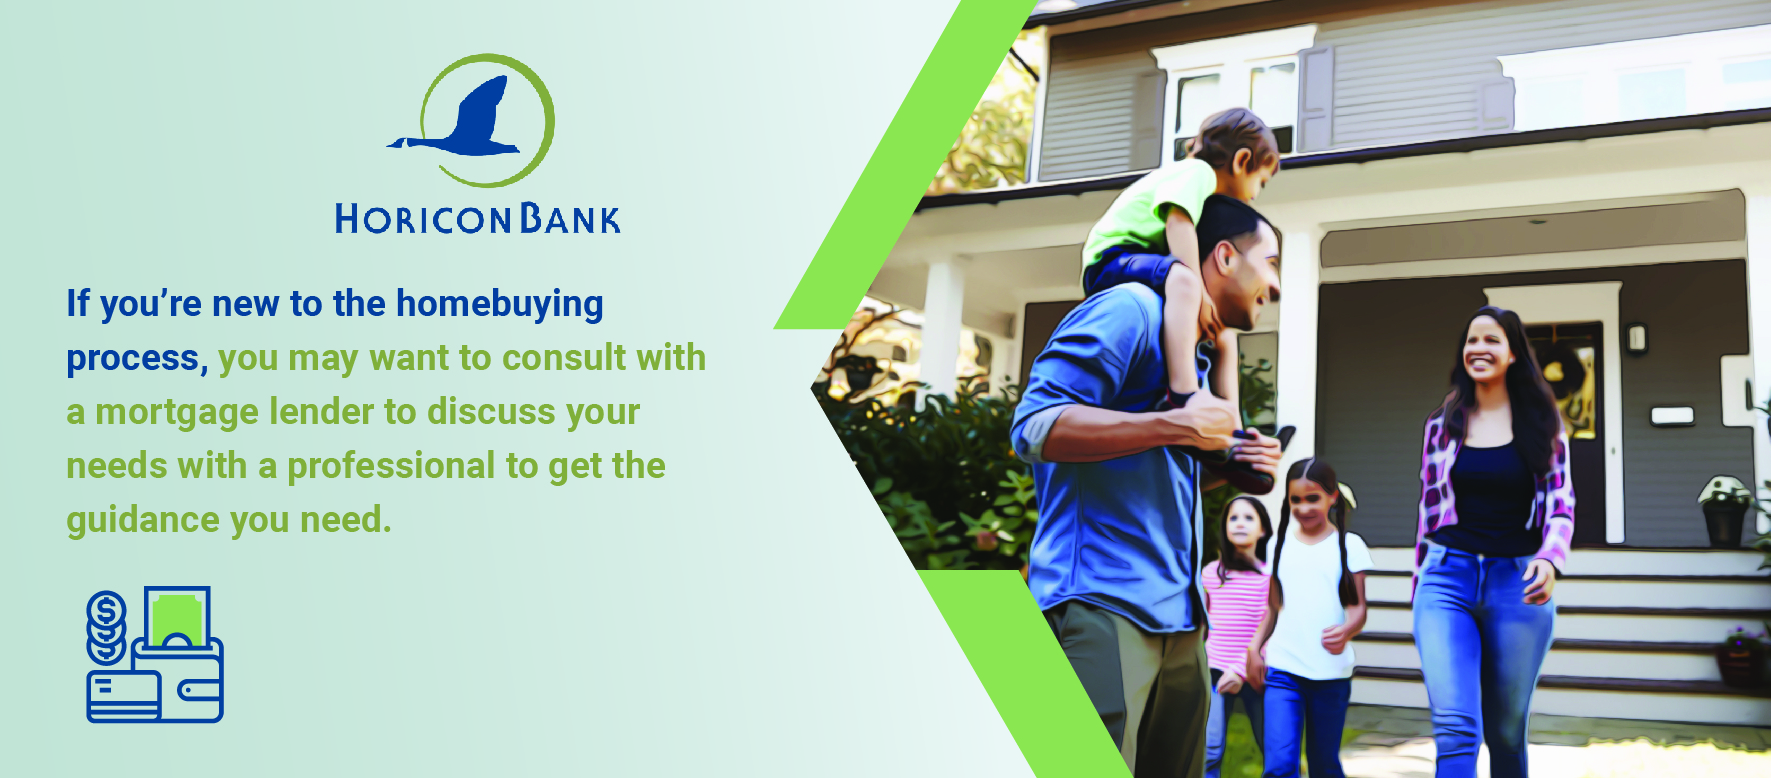 If you’re new to the homebuying process, you may want to consult with a mortgage lender to discuss your needs with a professional to get the guidance you need.